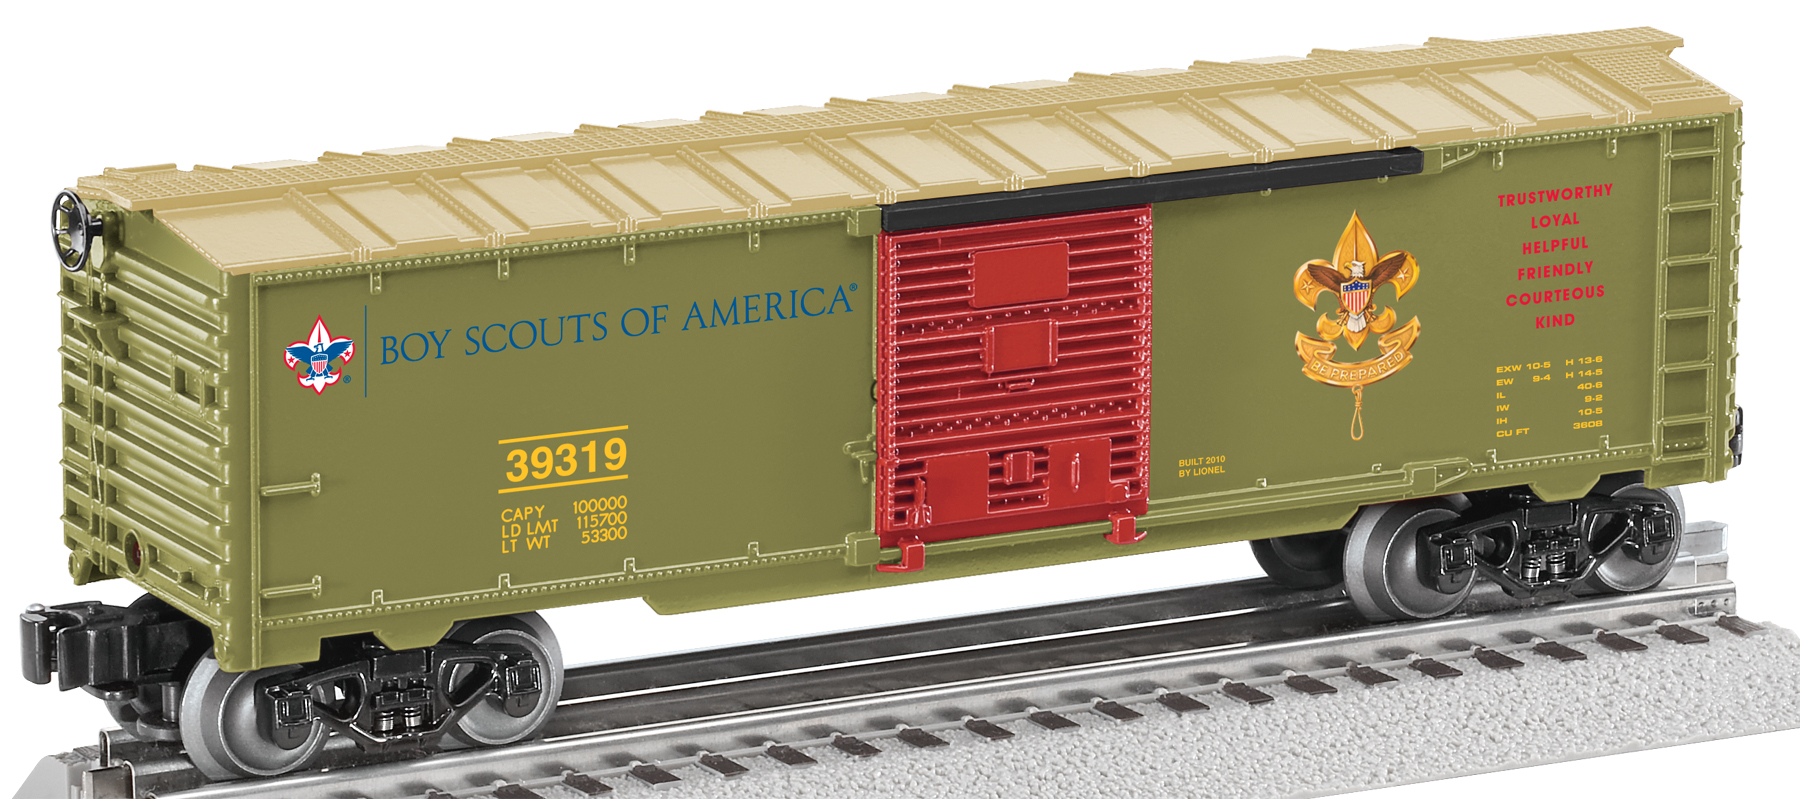 Boy Scouts® "Scout Law" Add-on Boxcar image